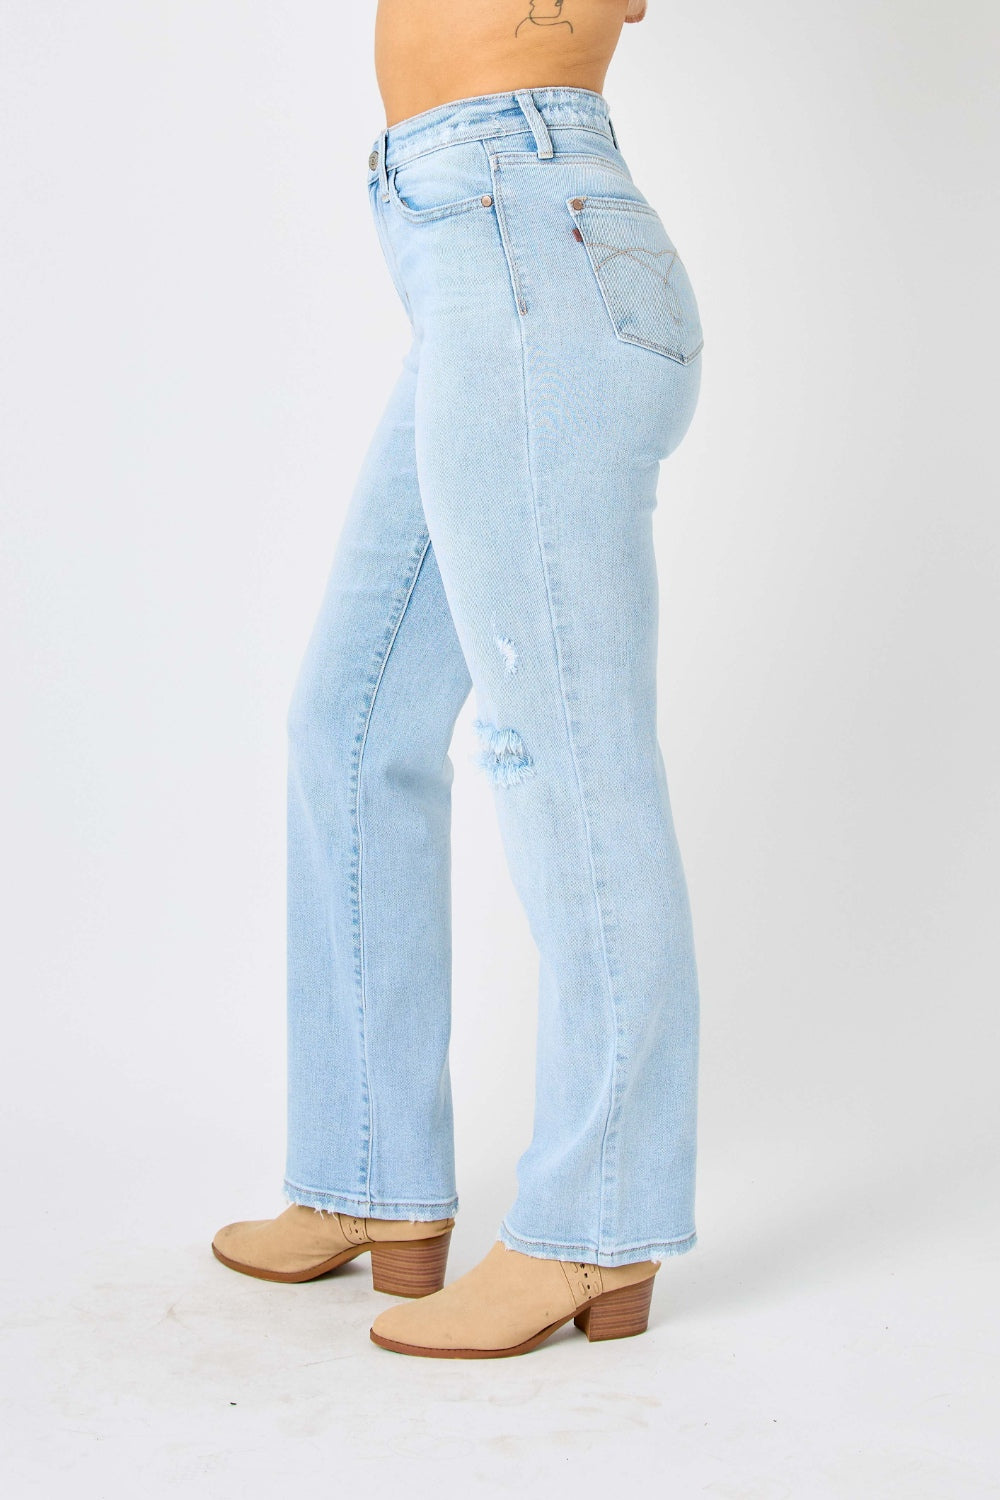 These high waist distressed straight jeans are a must-have. Their flattering cut accentuates your curves while the distressed details add an edgy vibe. Made with high-quality denim, they are both comfortable and durable. The high waist design also helps to cinch in your waist and create a slimming effect 0 -24W